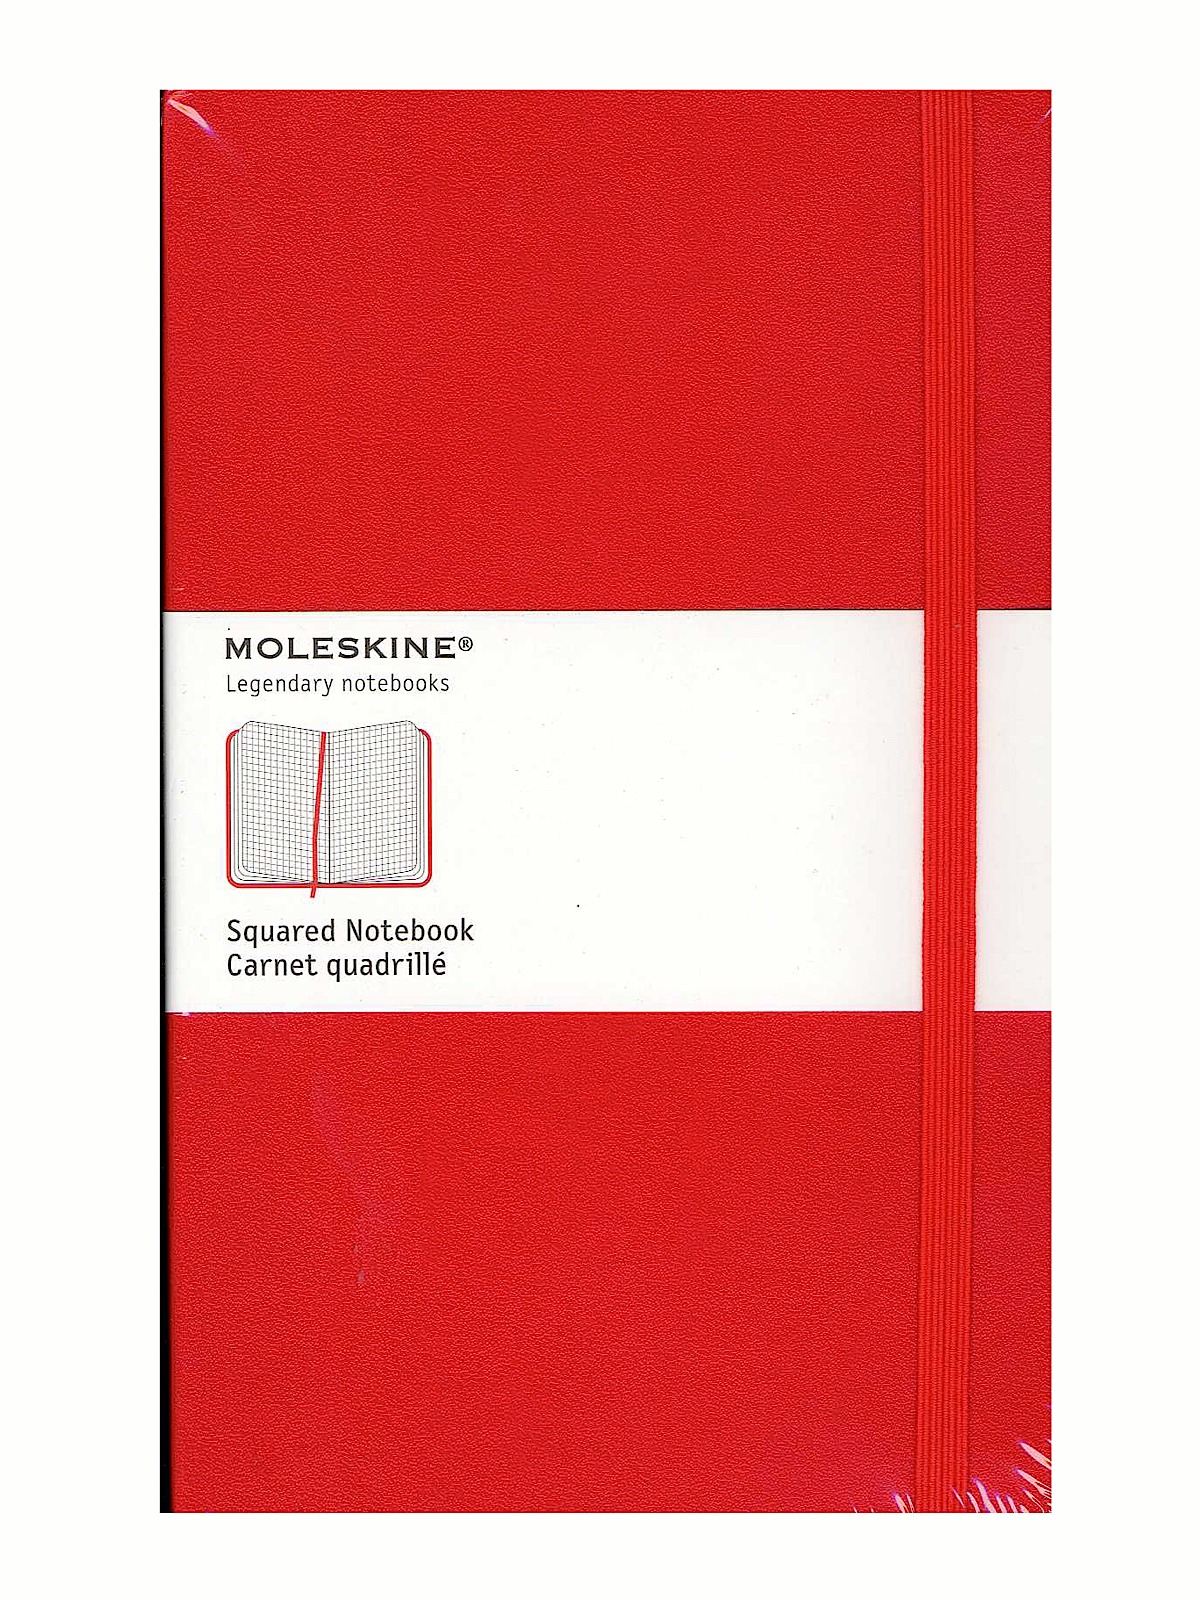 Classic Hard Cover Notebooks Red 3 1 2 In. X 5 1 2 In. 192 Pages, Squared